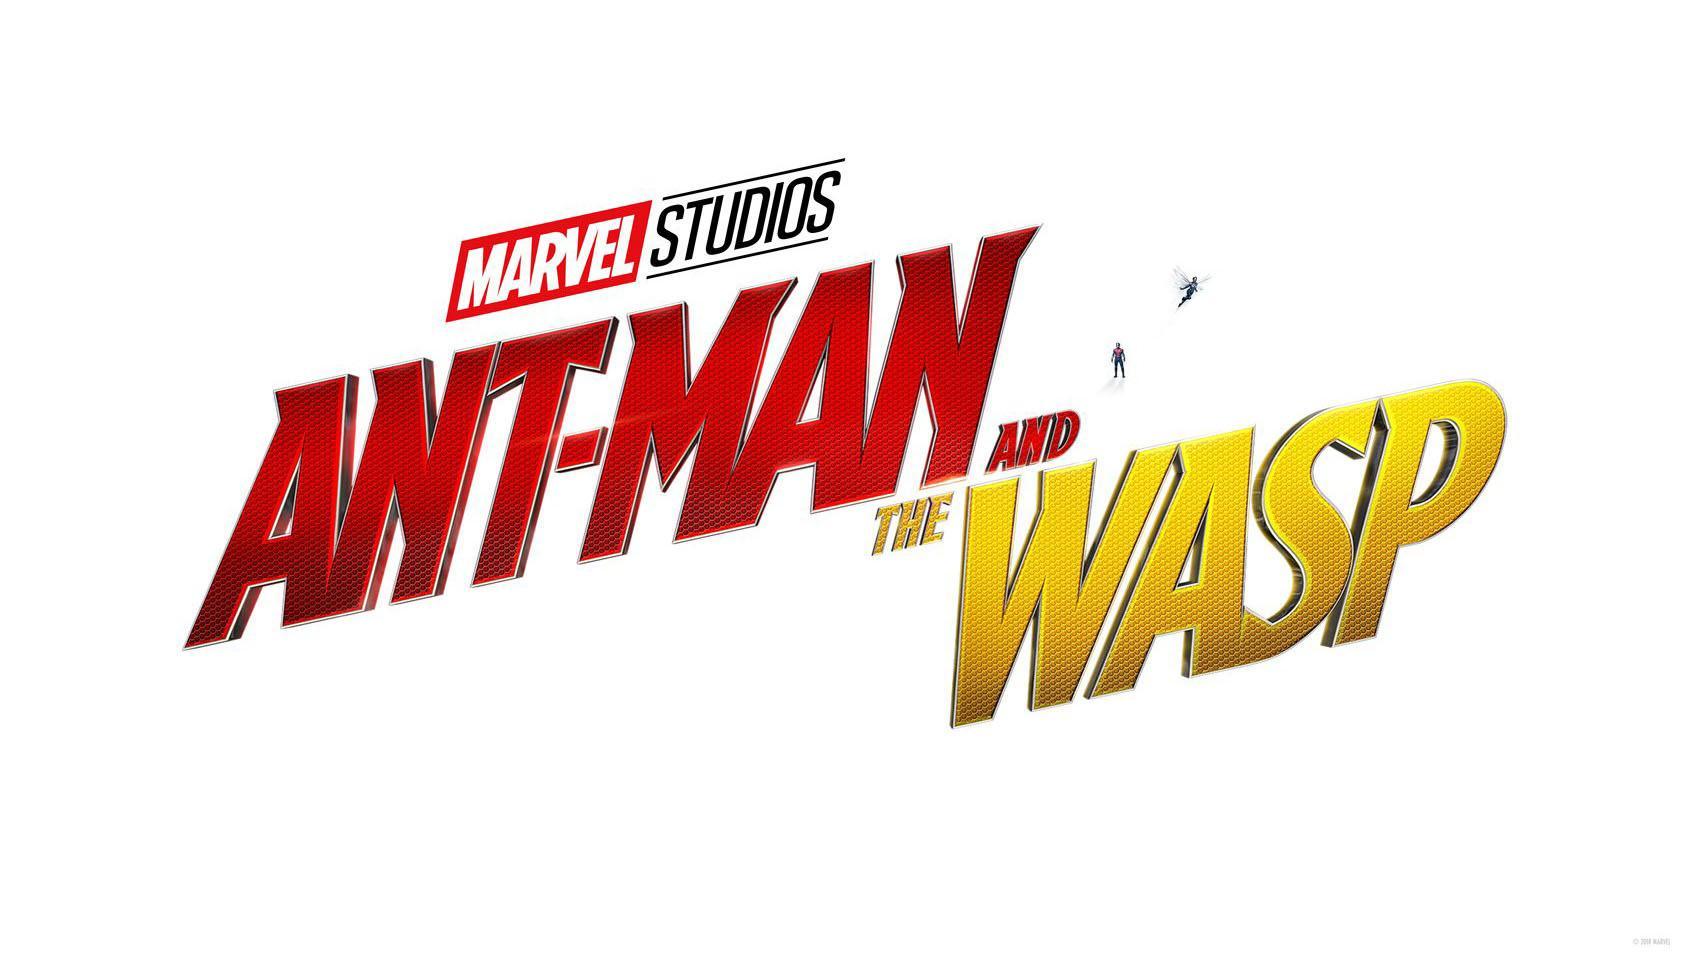 Ant-Man & The Wasp Review